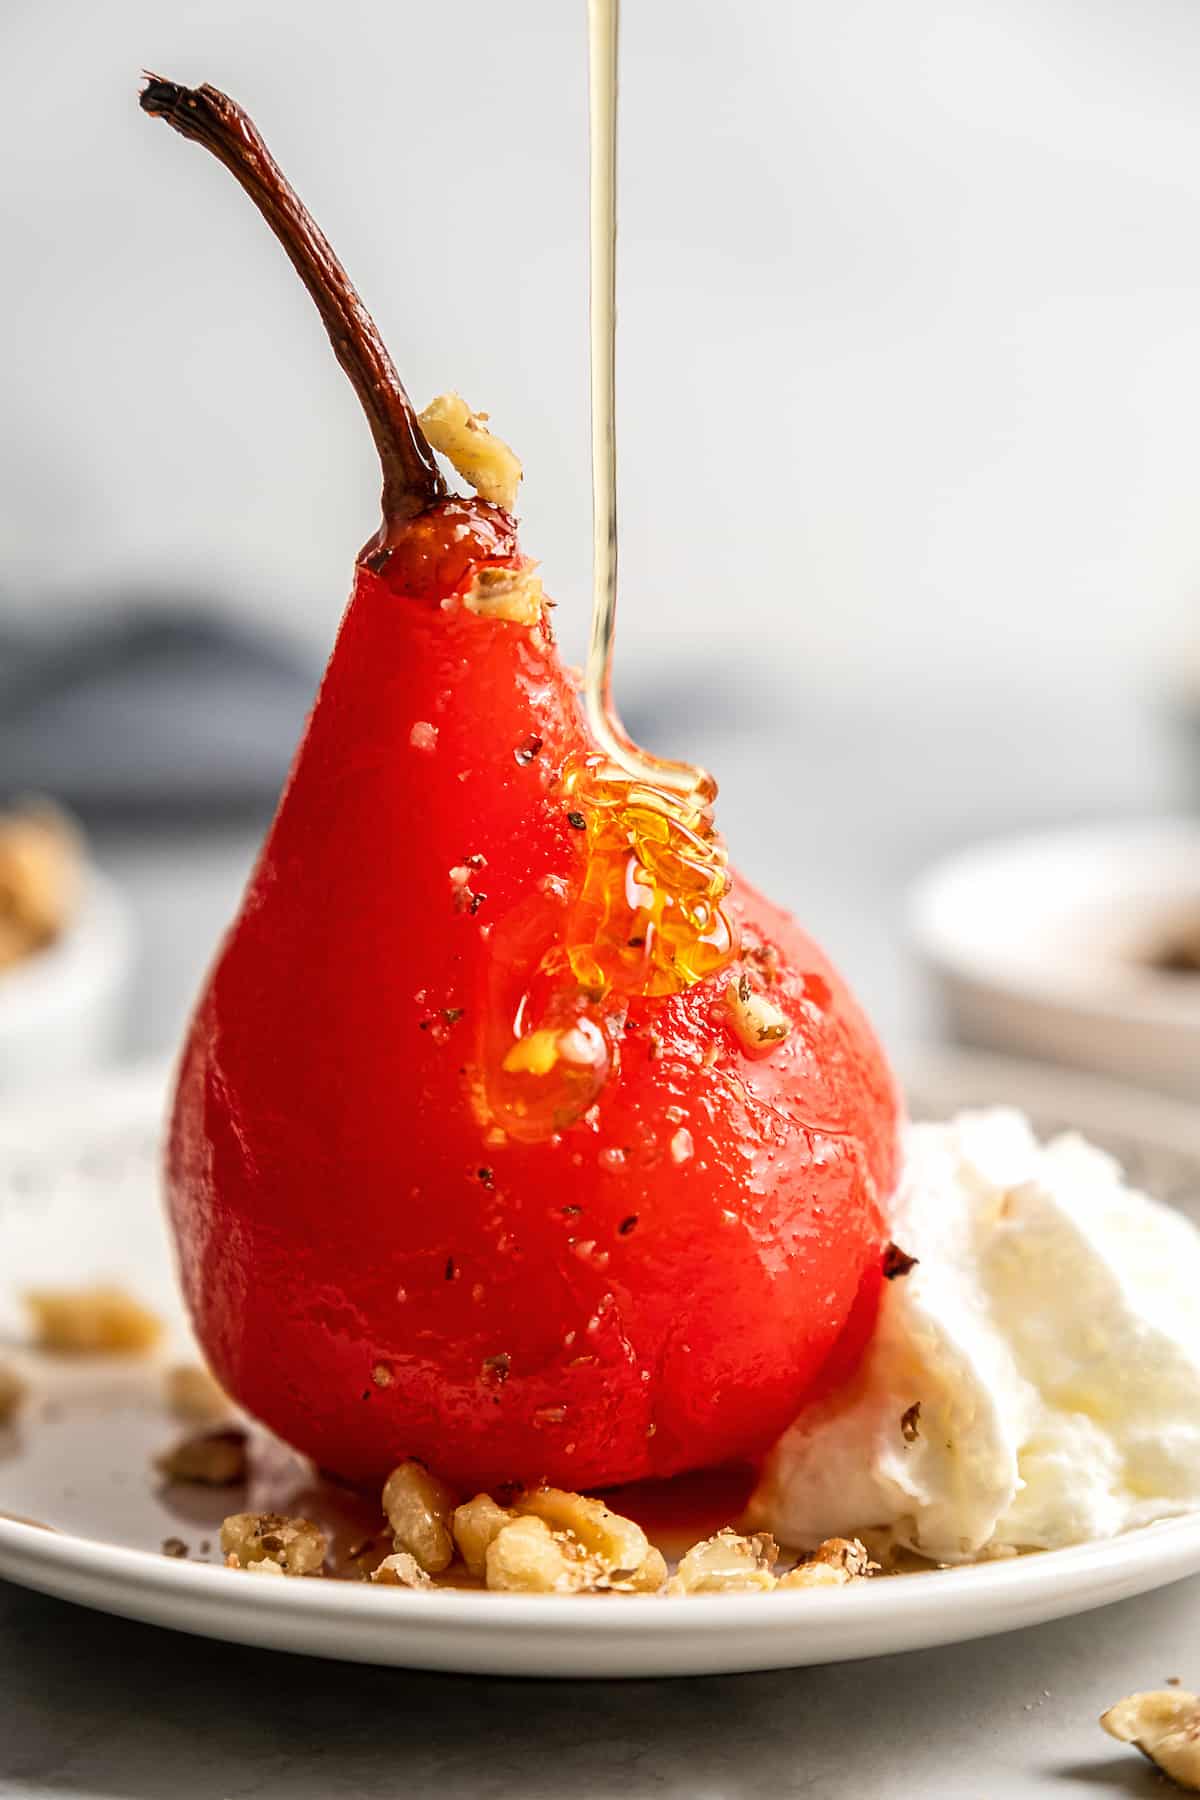 Close up of a poached pear on a plate with walnuts and whipped cream, with honey being poured over it